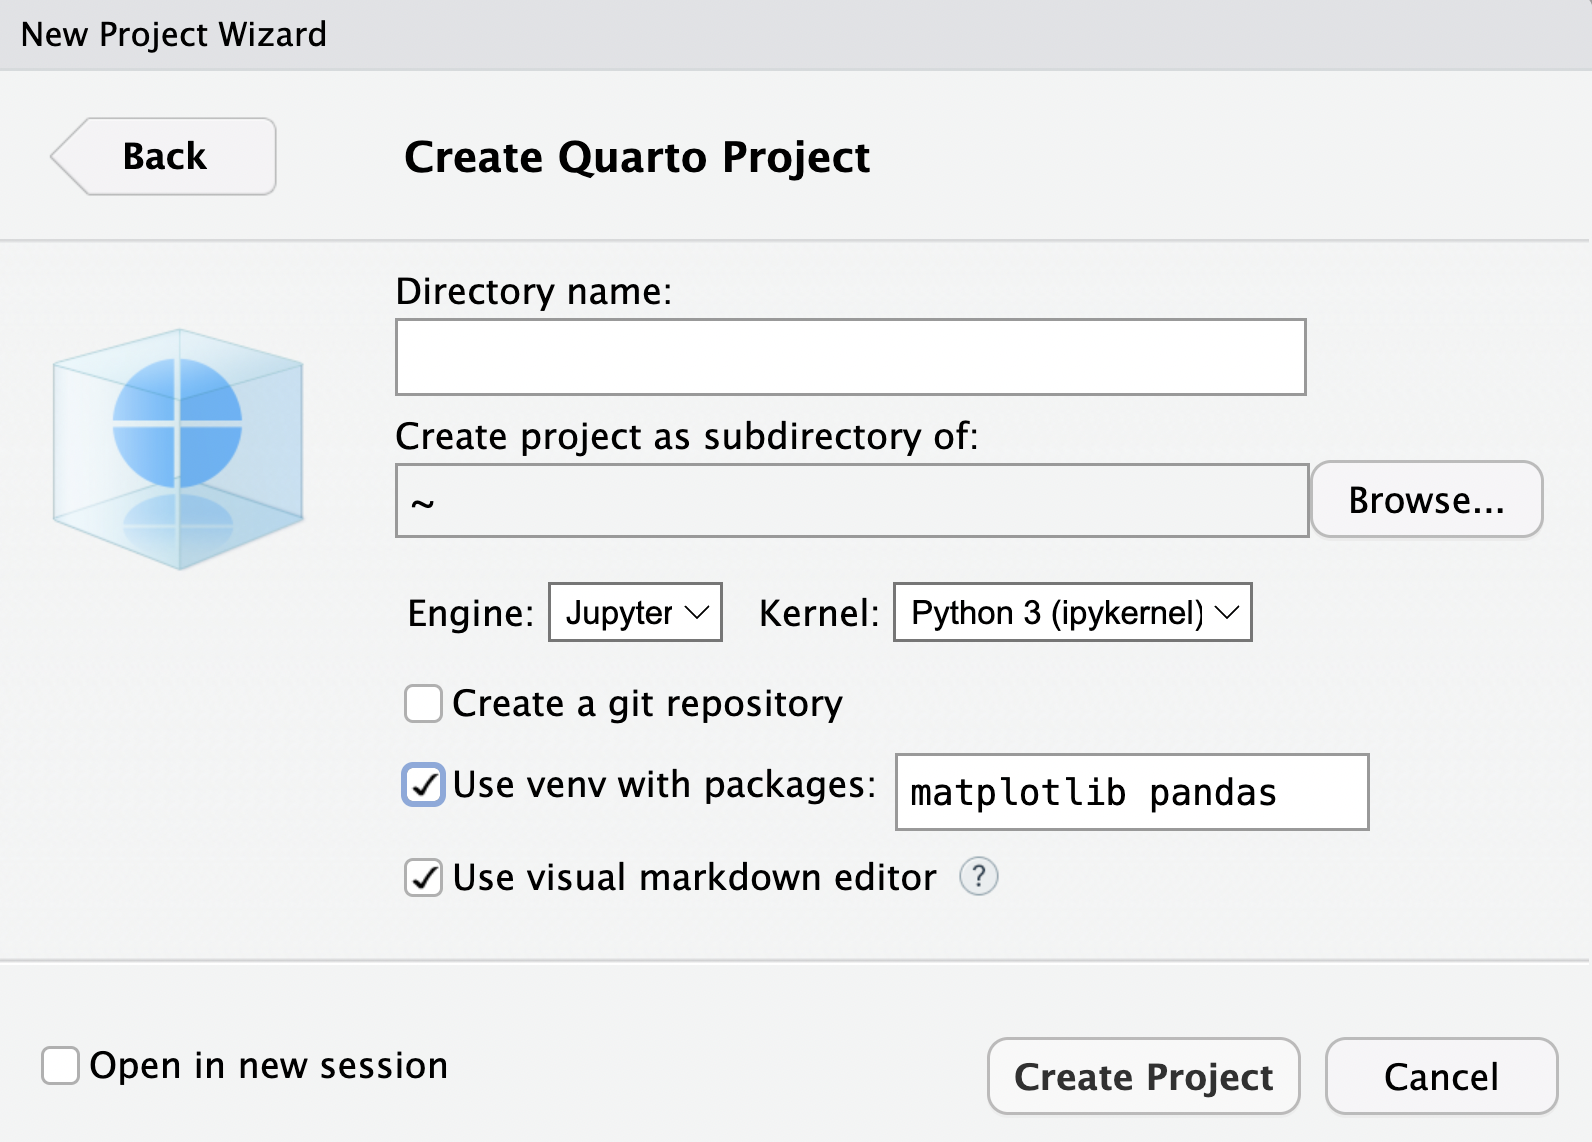 A section of the 'New Project Wizard' menu from Rstudio. This section is titled 'Create Quarto Project'. The Quarto logo is displayed on the left. ON the right are fields for 'Type', 'Directory name', and 'Create project as subdirectory of:'. Underneath that are options for 'Engine' and 'Kernel'. The option for 'Engine' is set to 'Jupyter,' and the option for 'Kernel' is set to 'Python 3'. Underneath these are options for 'Create a git repository', and 'Use venv with this project'. The button for 'Use venv...' is selected, and there is a text box to the right with the Python package names 'matplotlib' and 'pandas' filled in. There are buttons for 'Create Project' and 'Cancel' arranged side-by-side in the bottom right of the window. There is an option to 'Open in new session' in the button left corner.